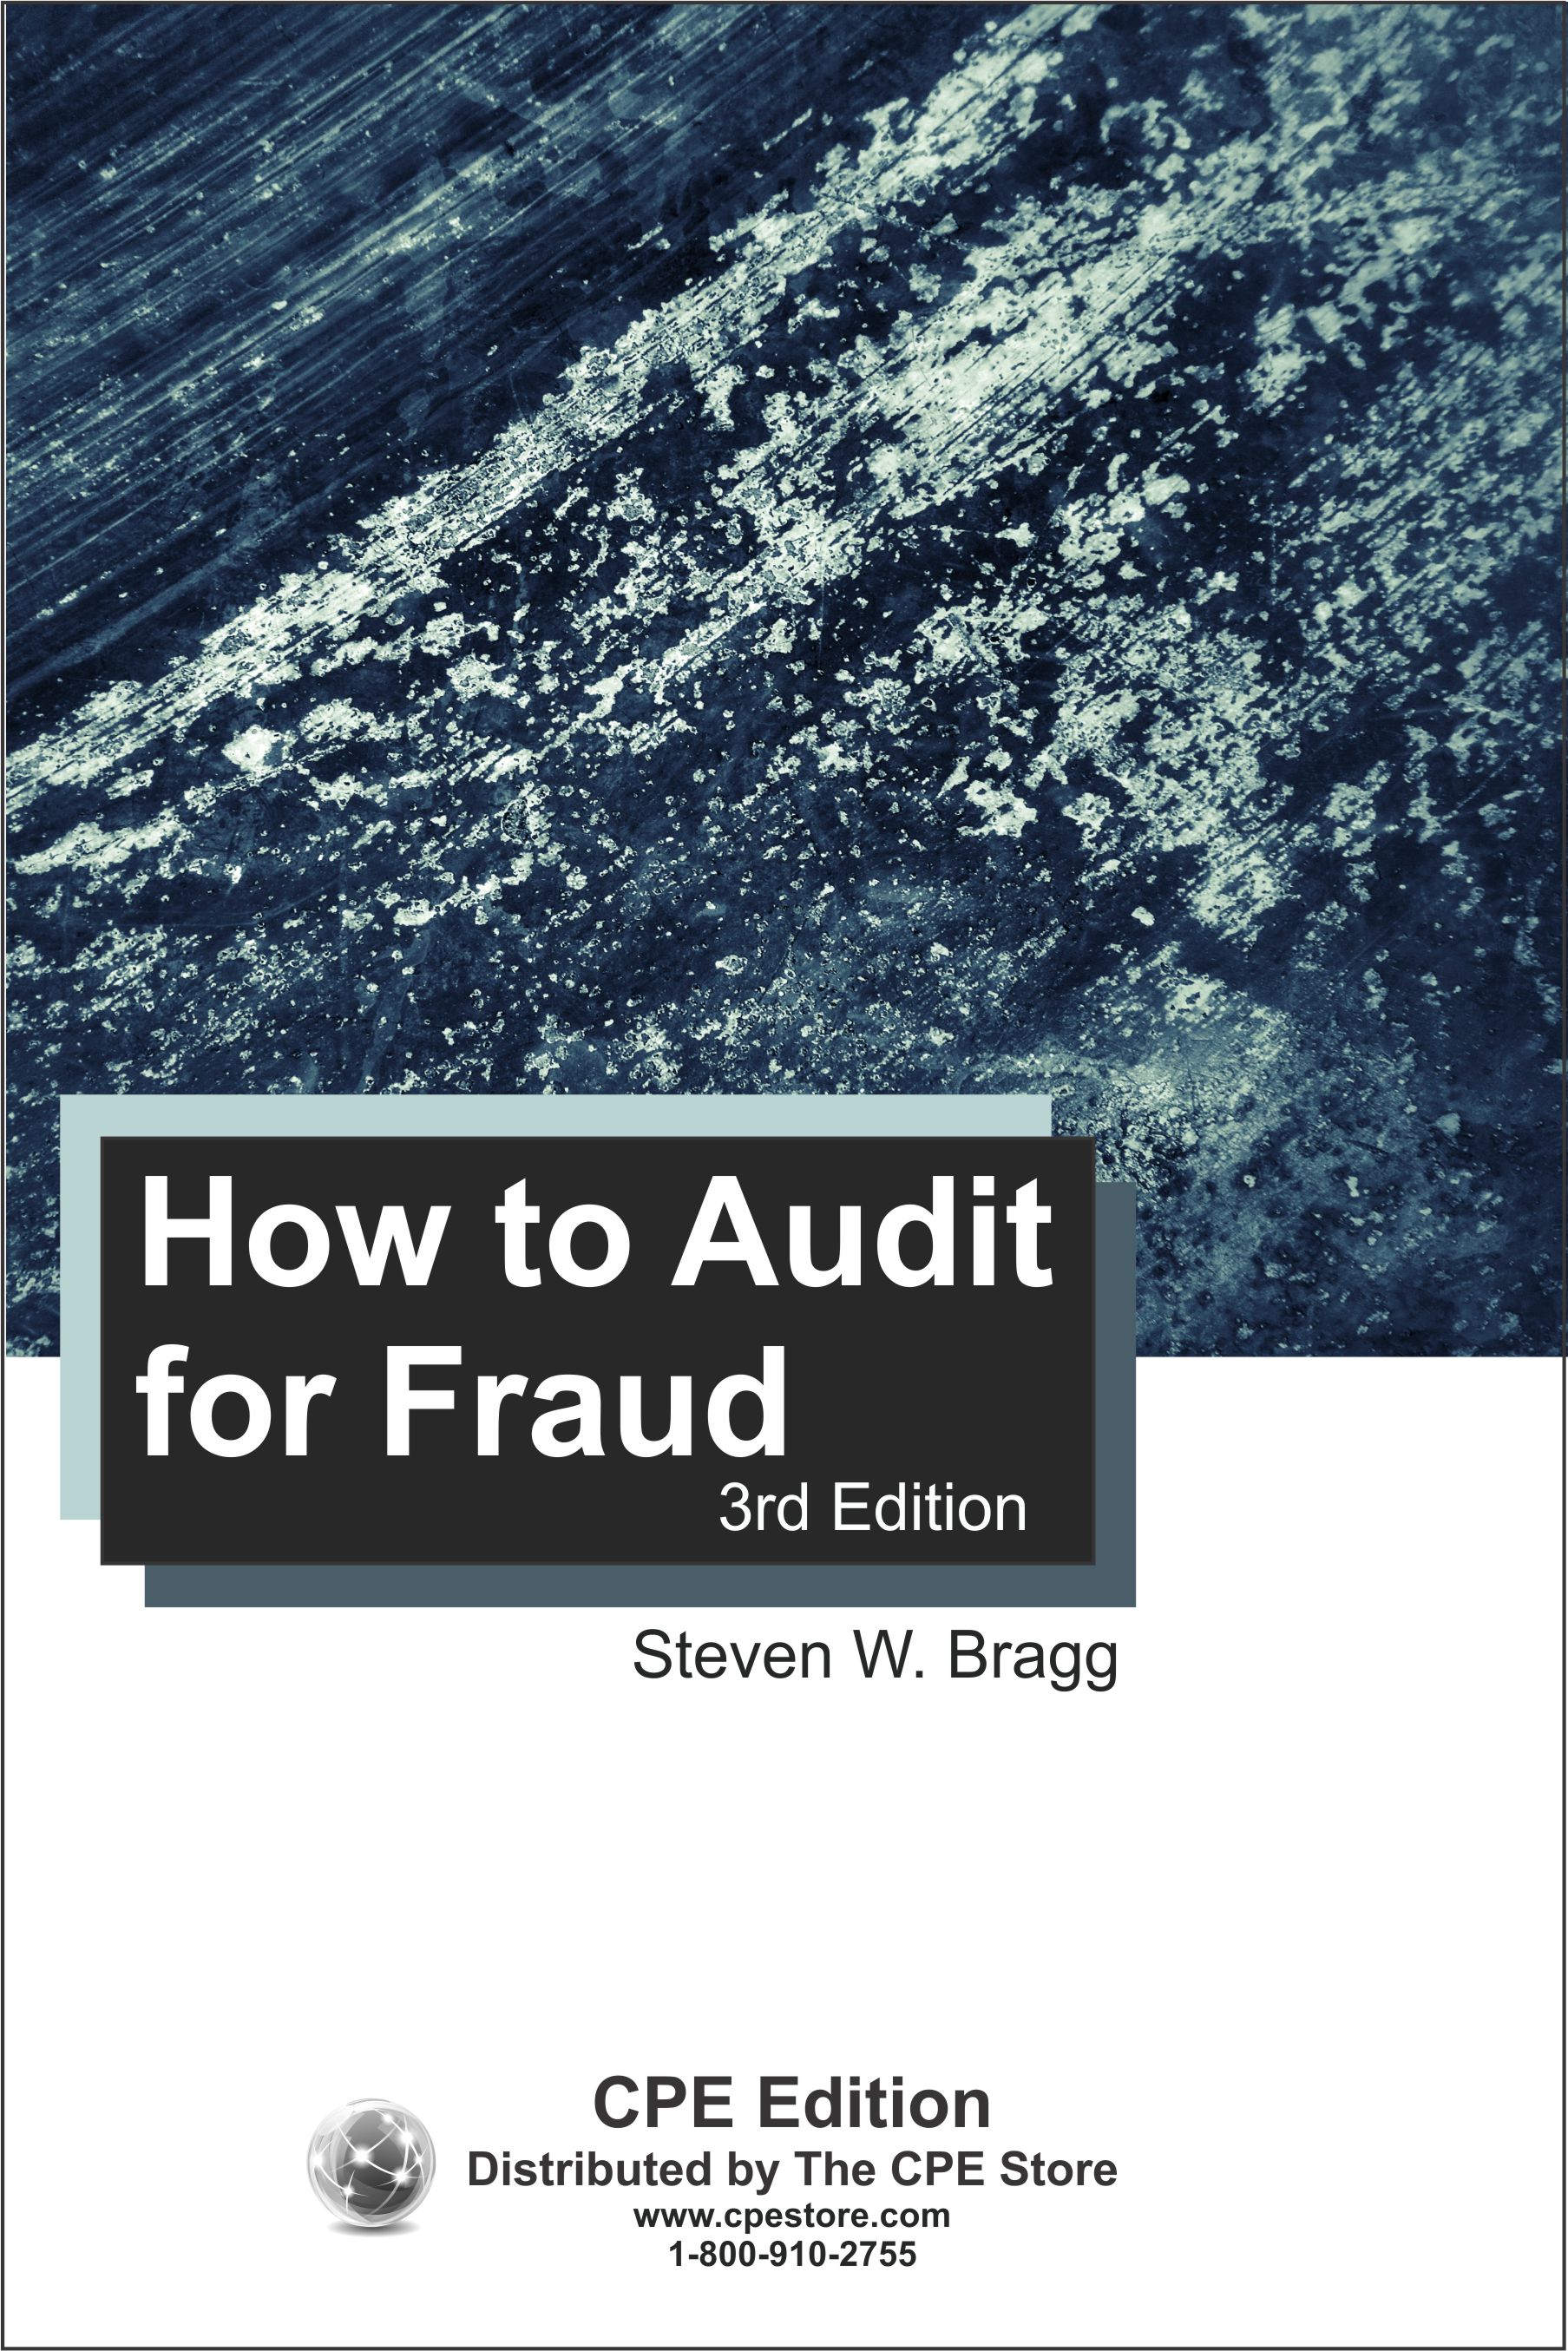 How to Audit for Fraud